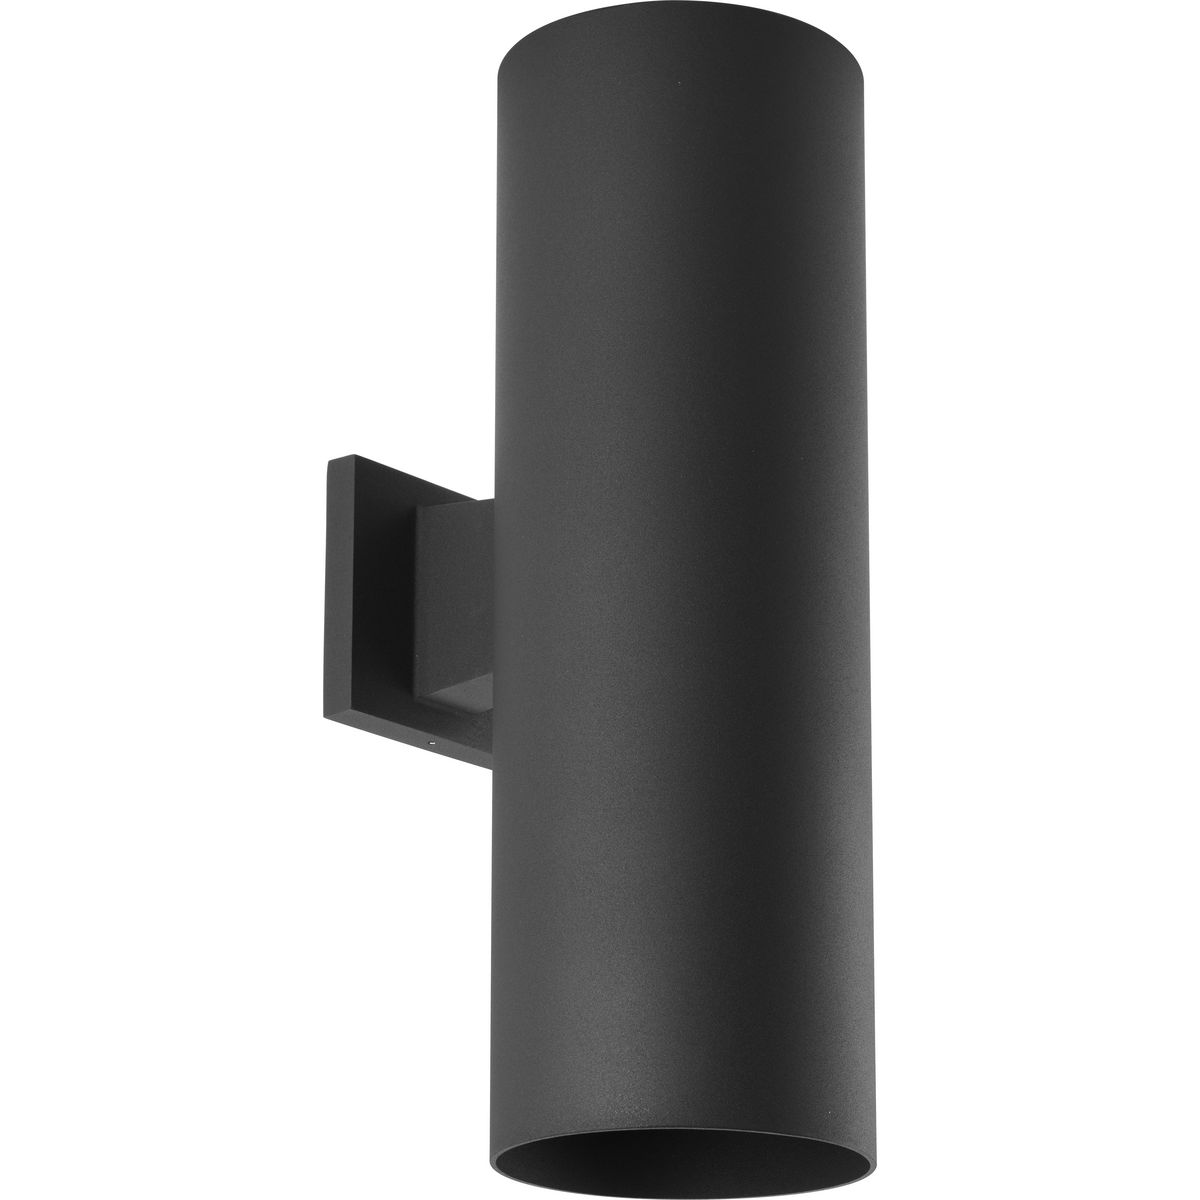 6" Outdoor Up/Down Wall Cylinder Two-Light Modern Black Outdoor Wall Lantern with Top Lense - Wet Location Listed